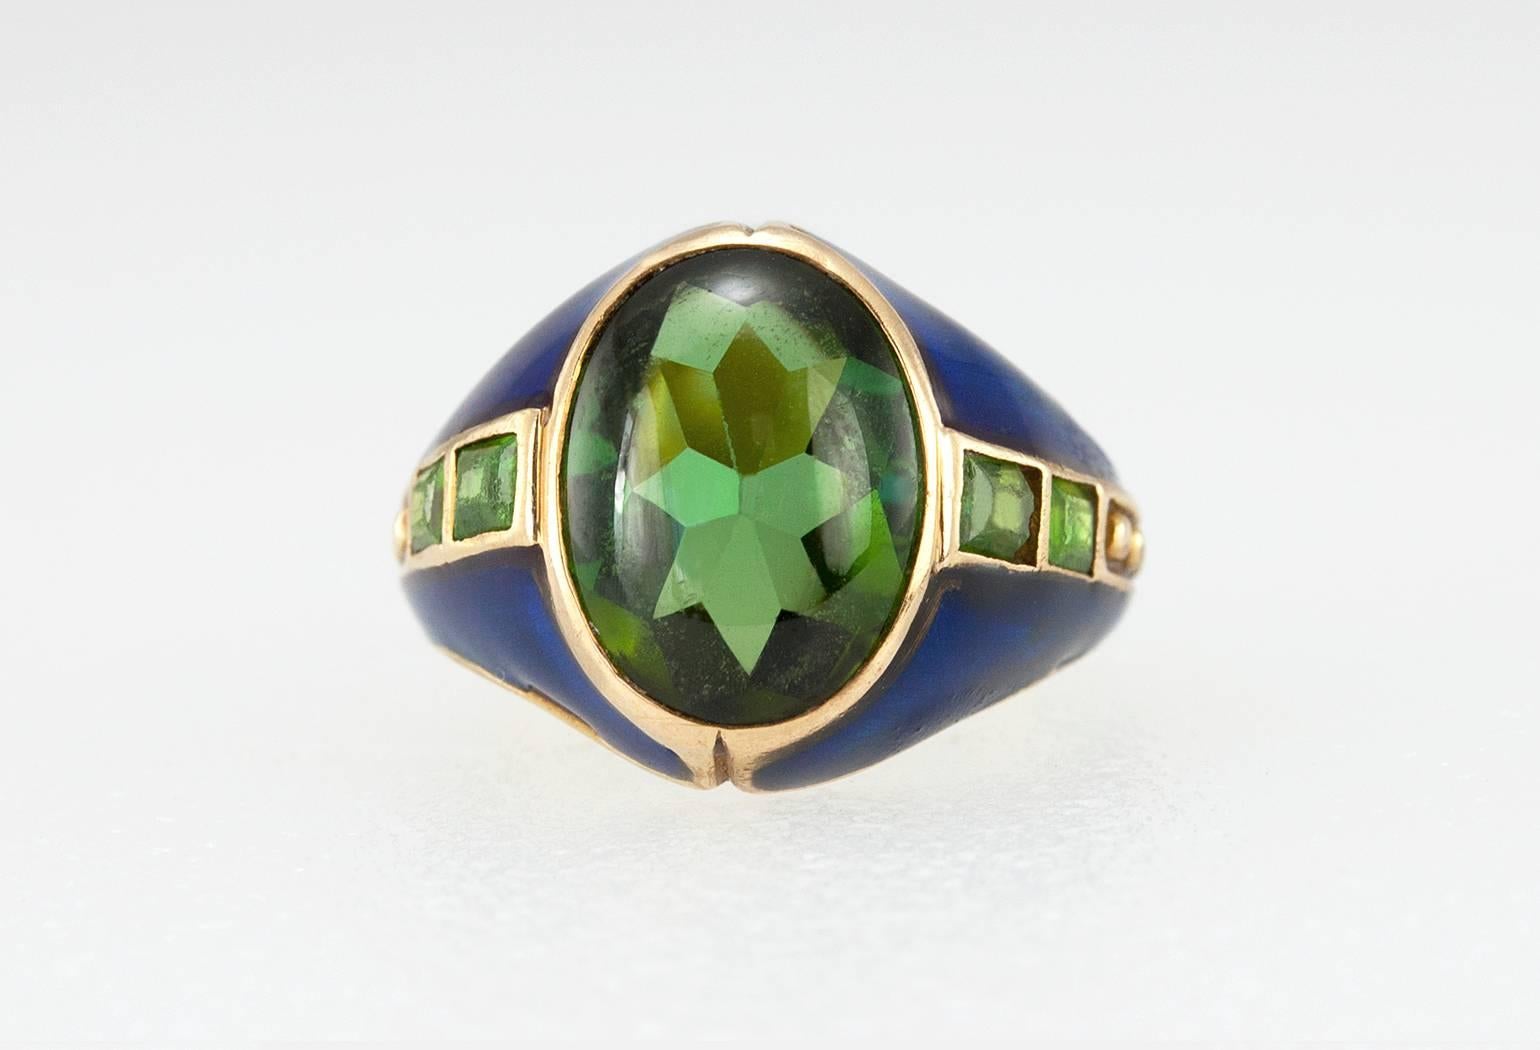 This incredible Arts and Crafts 18 karat yellow gold ring was made by Tiffany & Co. around the turn of the century. It features a bezel set peridot cabochon with two demantoid garnets on each side with beautiful blue enamel. Circa 1900s.  A truly